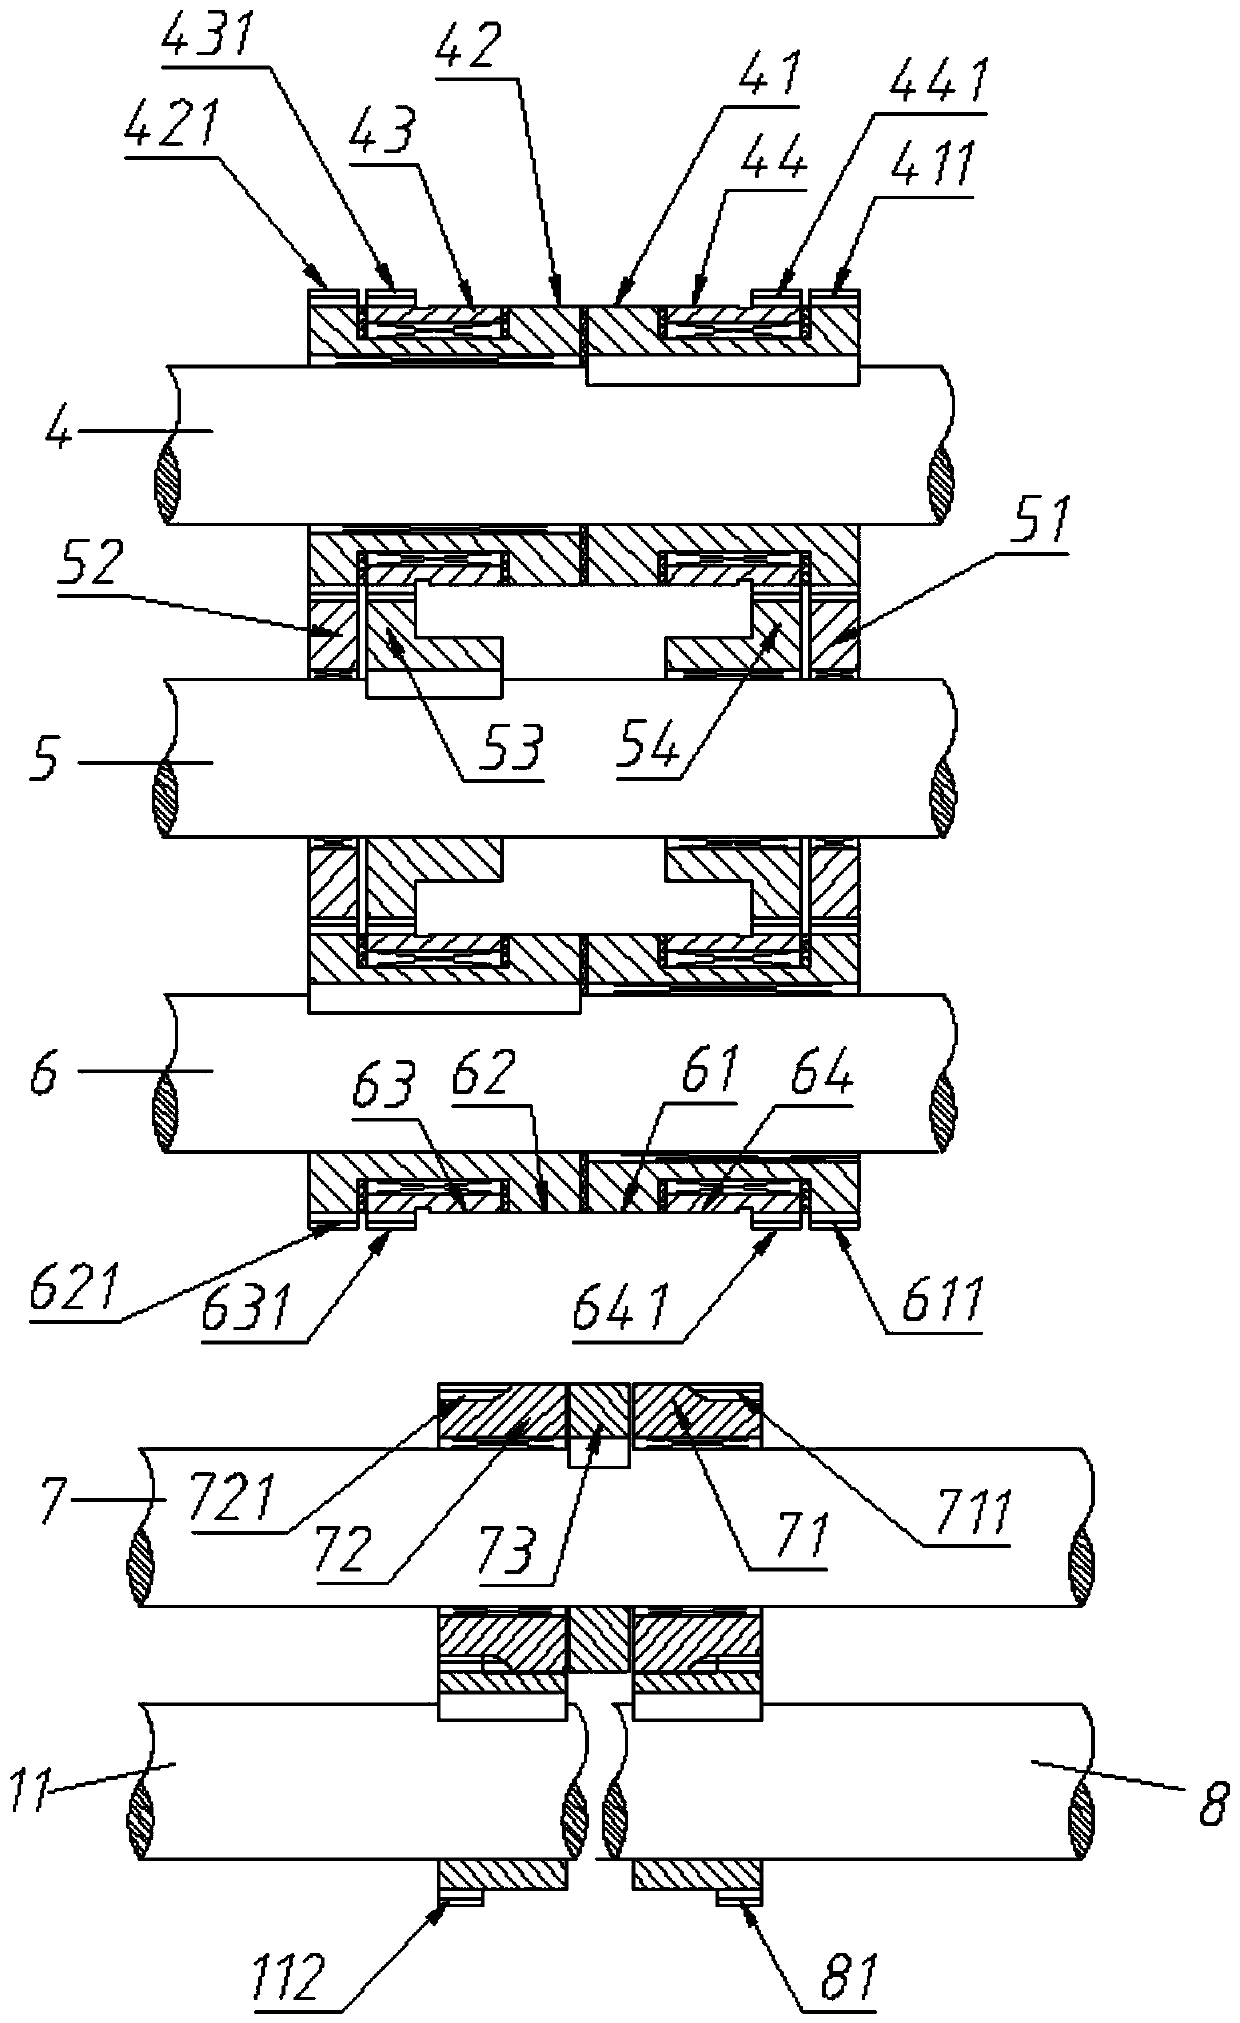 Five-channel hollow-spindle fancy yarn forming device and method